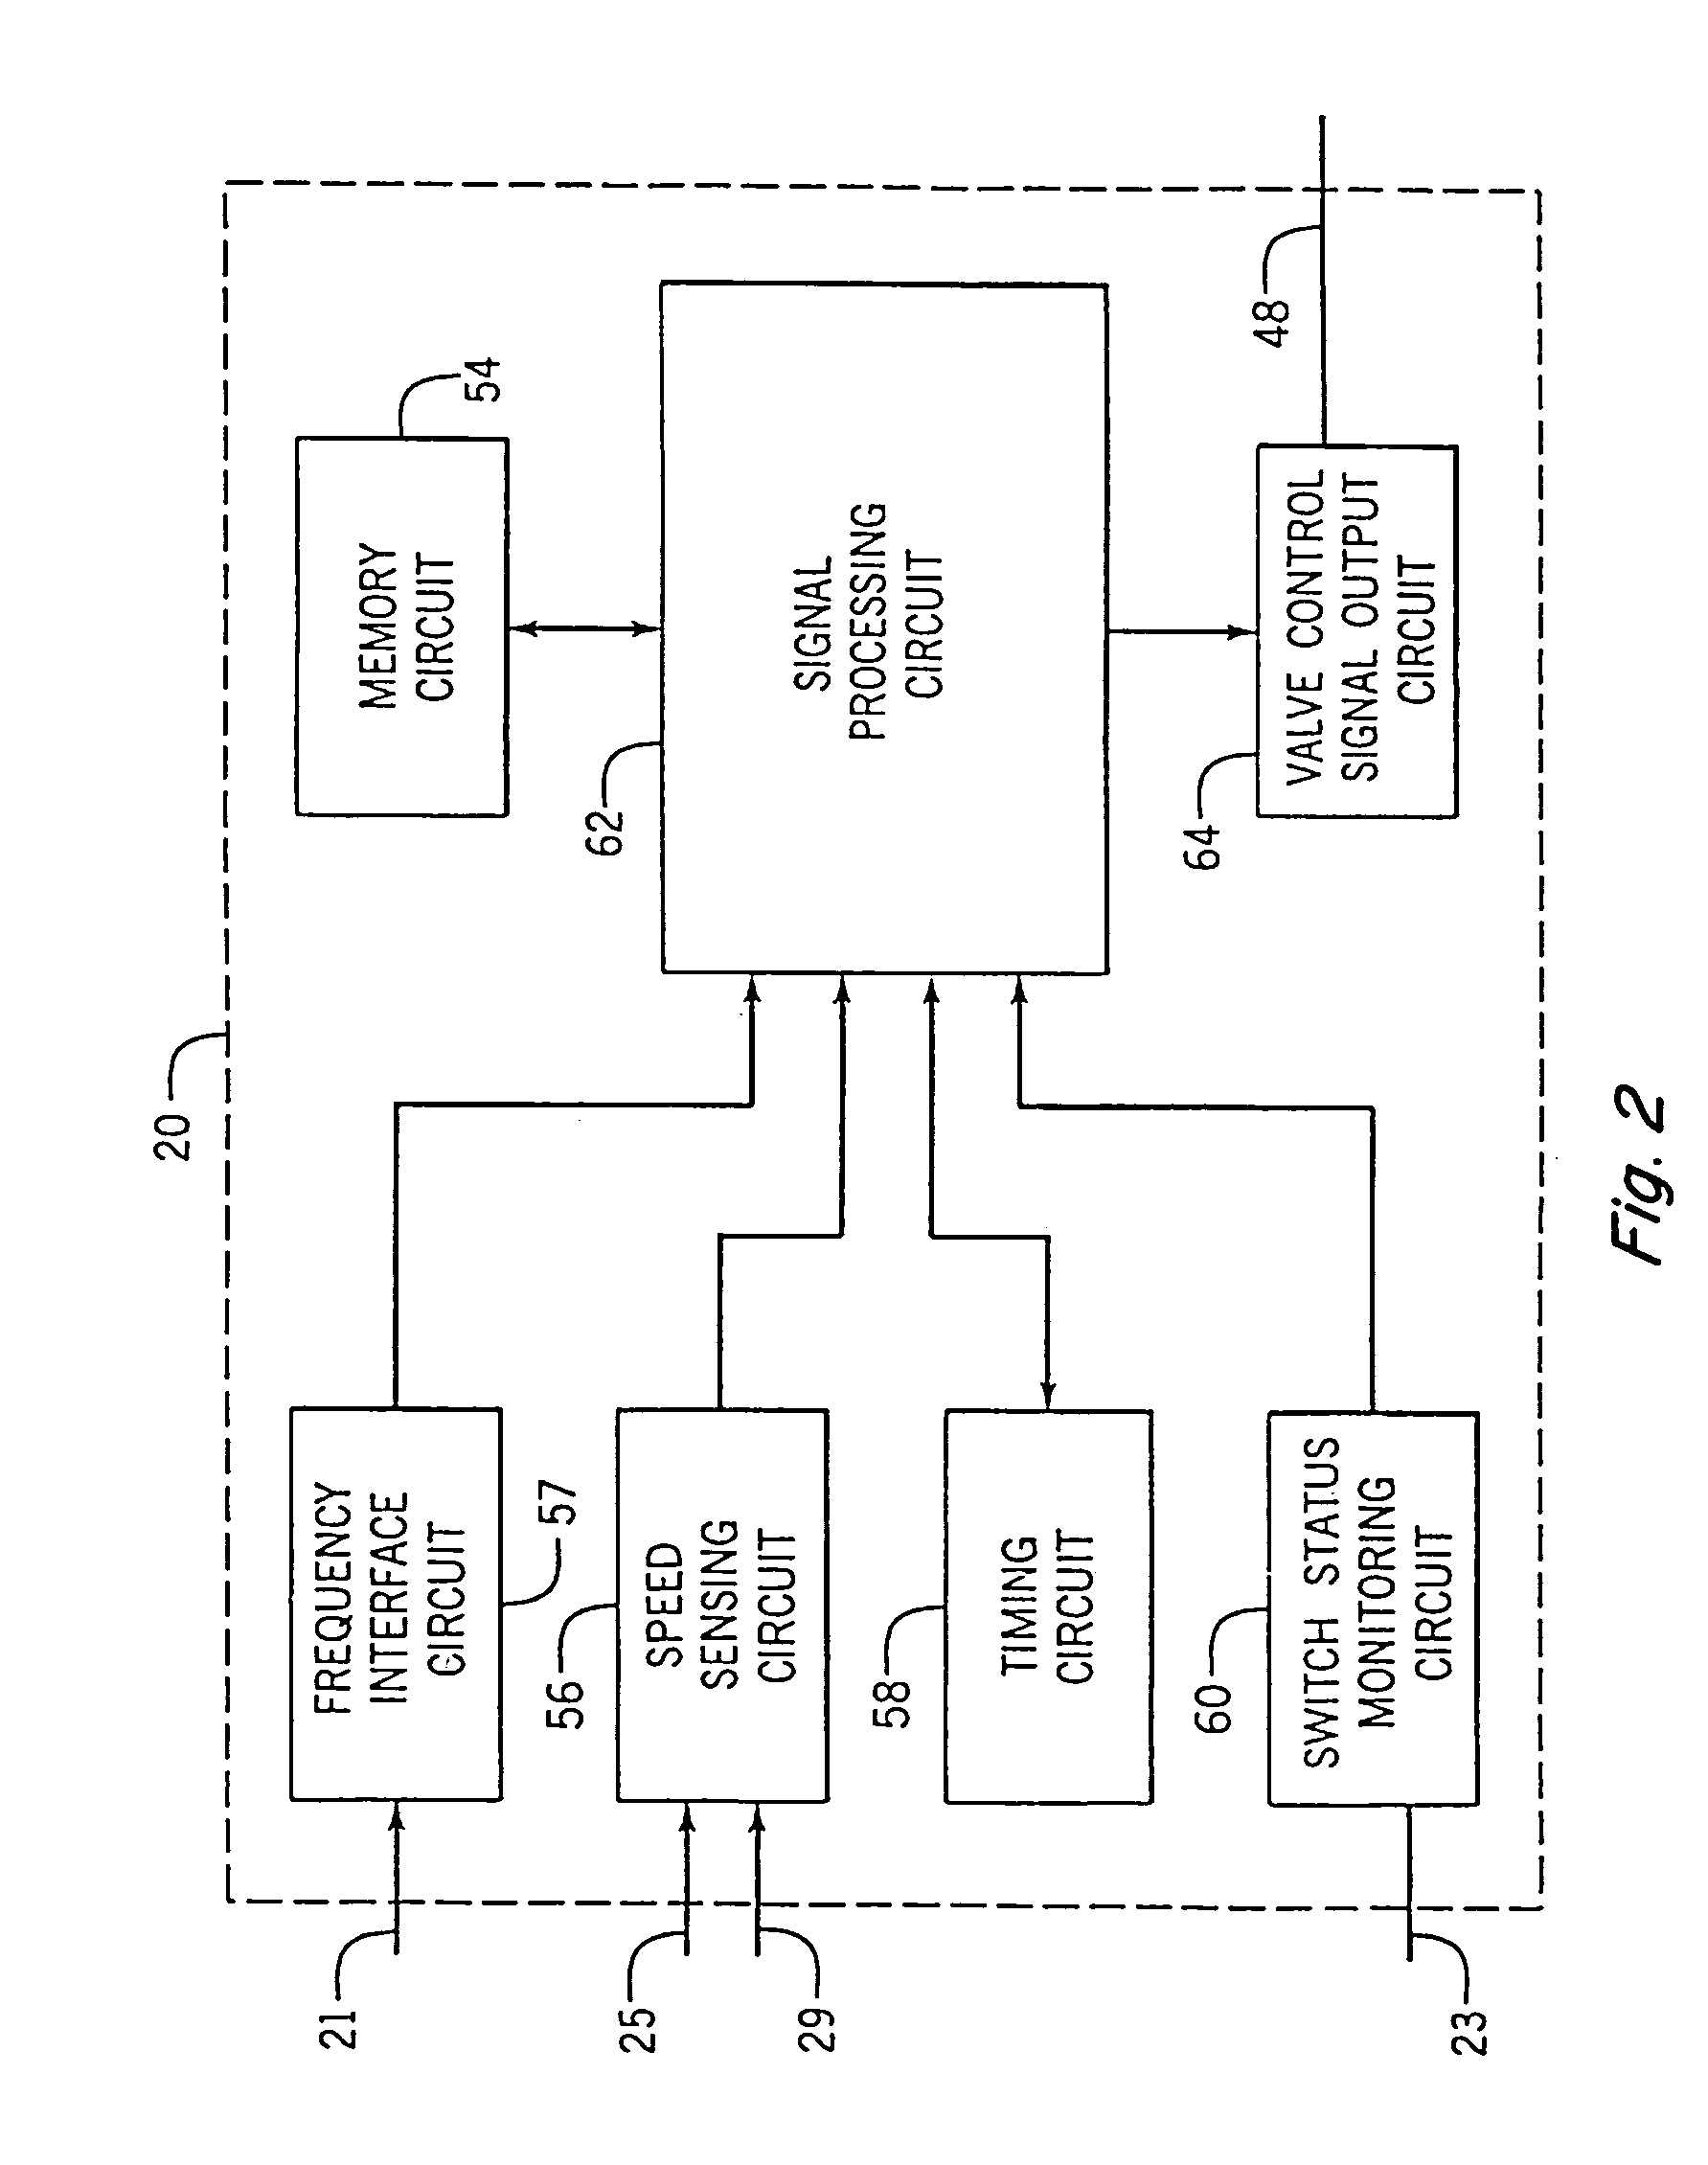 Power take-off control system